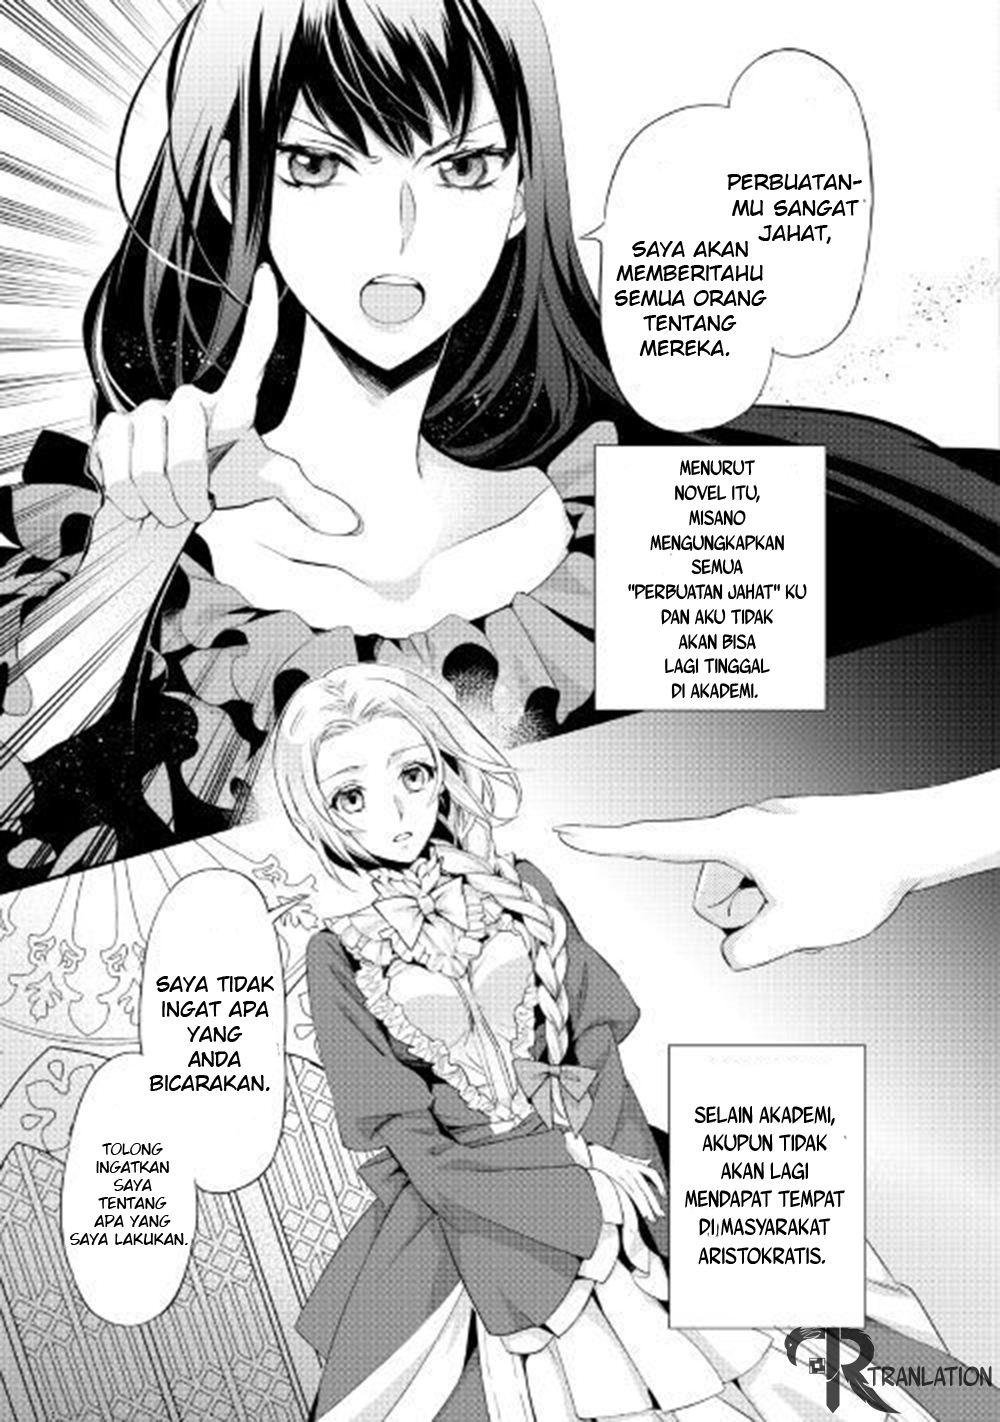 Milady Just Wants to Relax Chapter 01 10